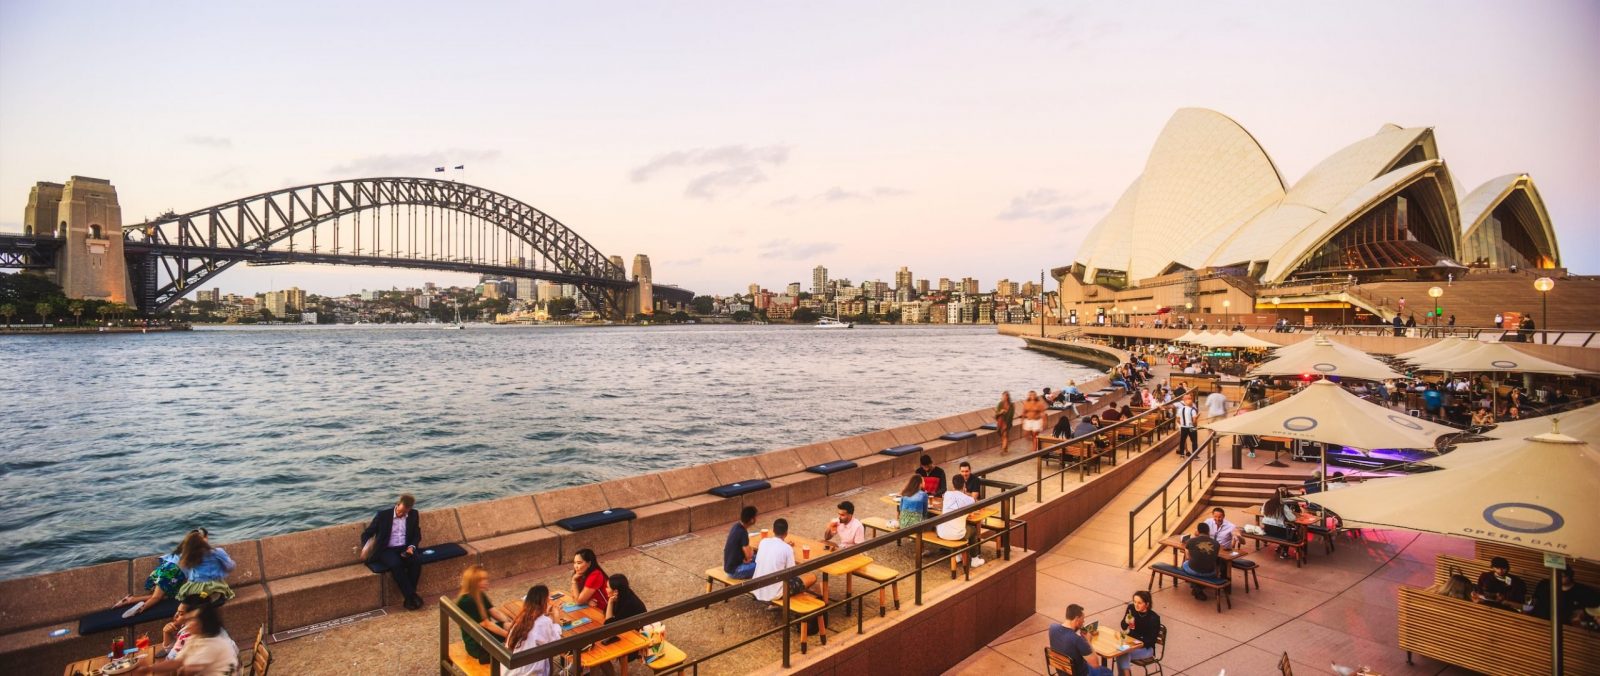 Panoramic view of Sydney Opera House and Harbour Bridge from the Opera Bar, Australia.